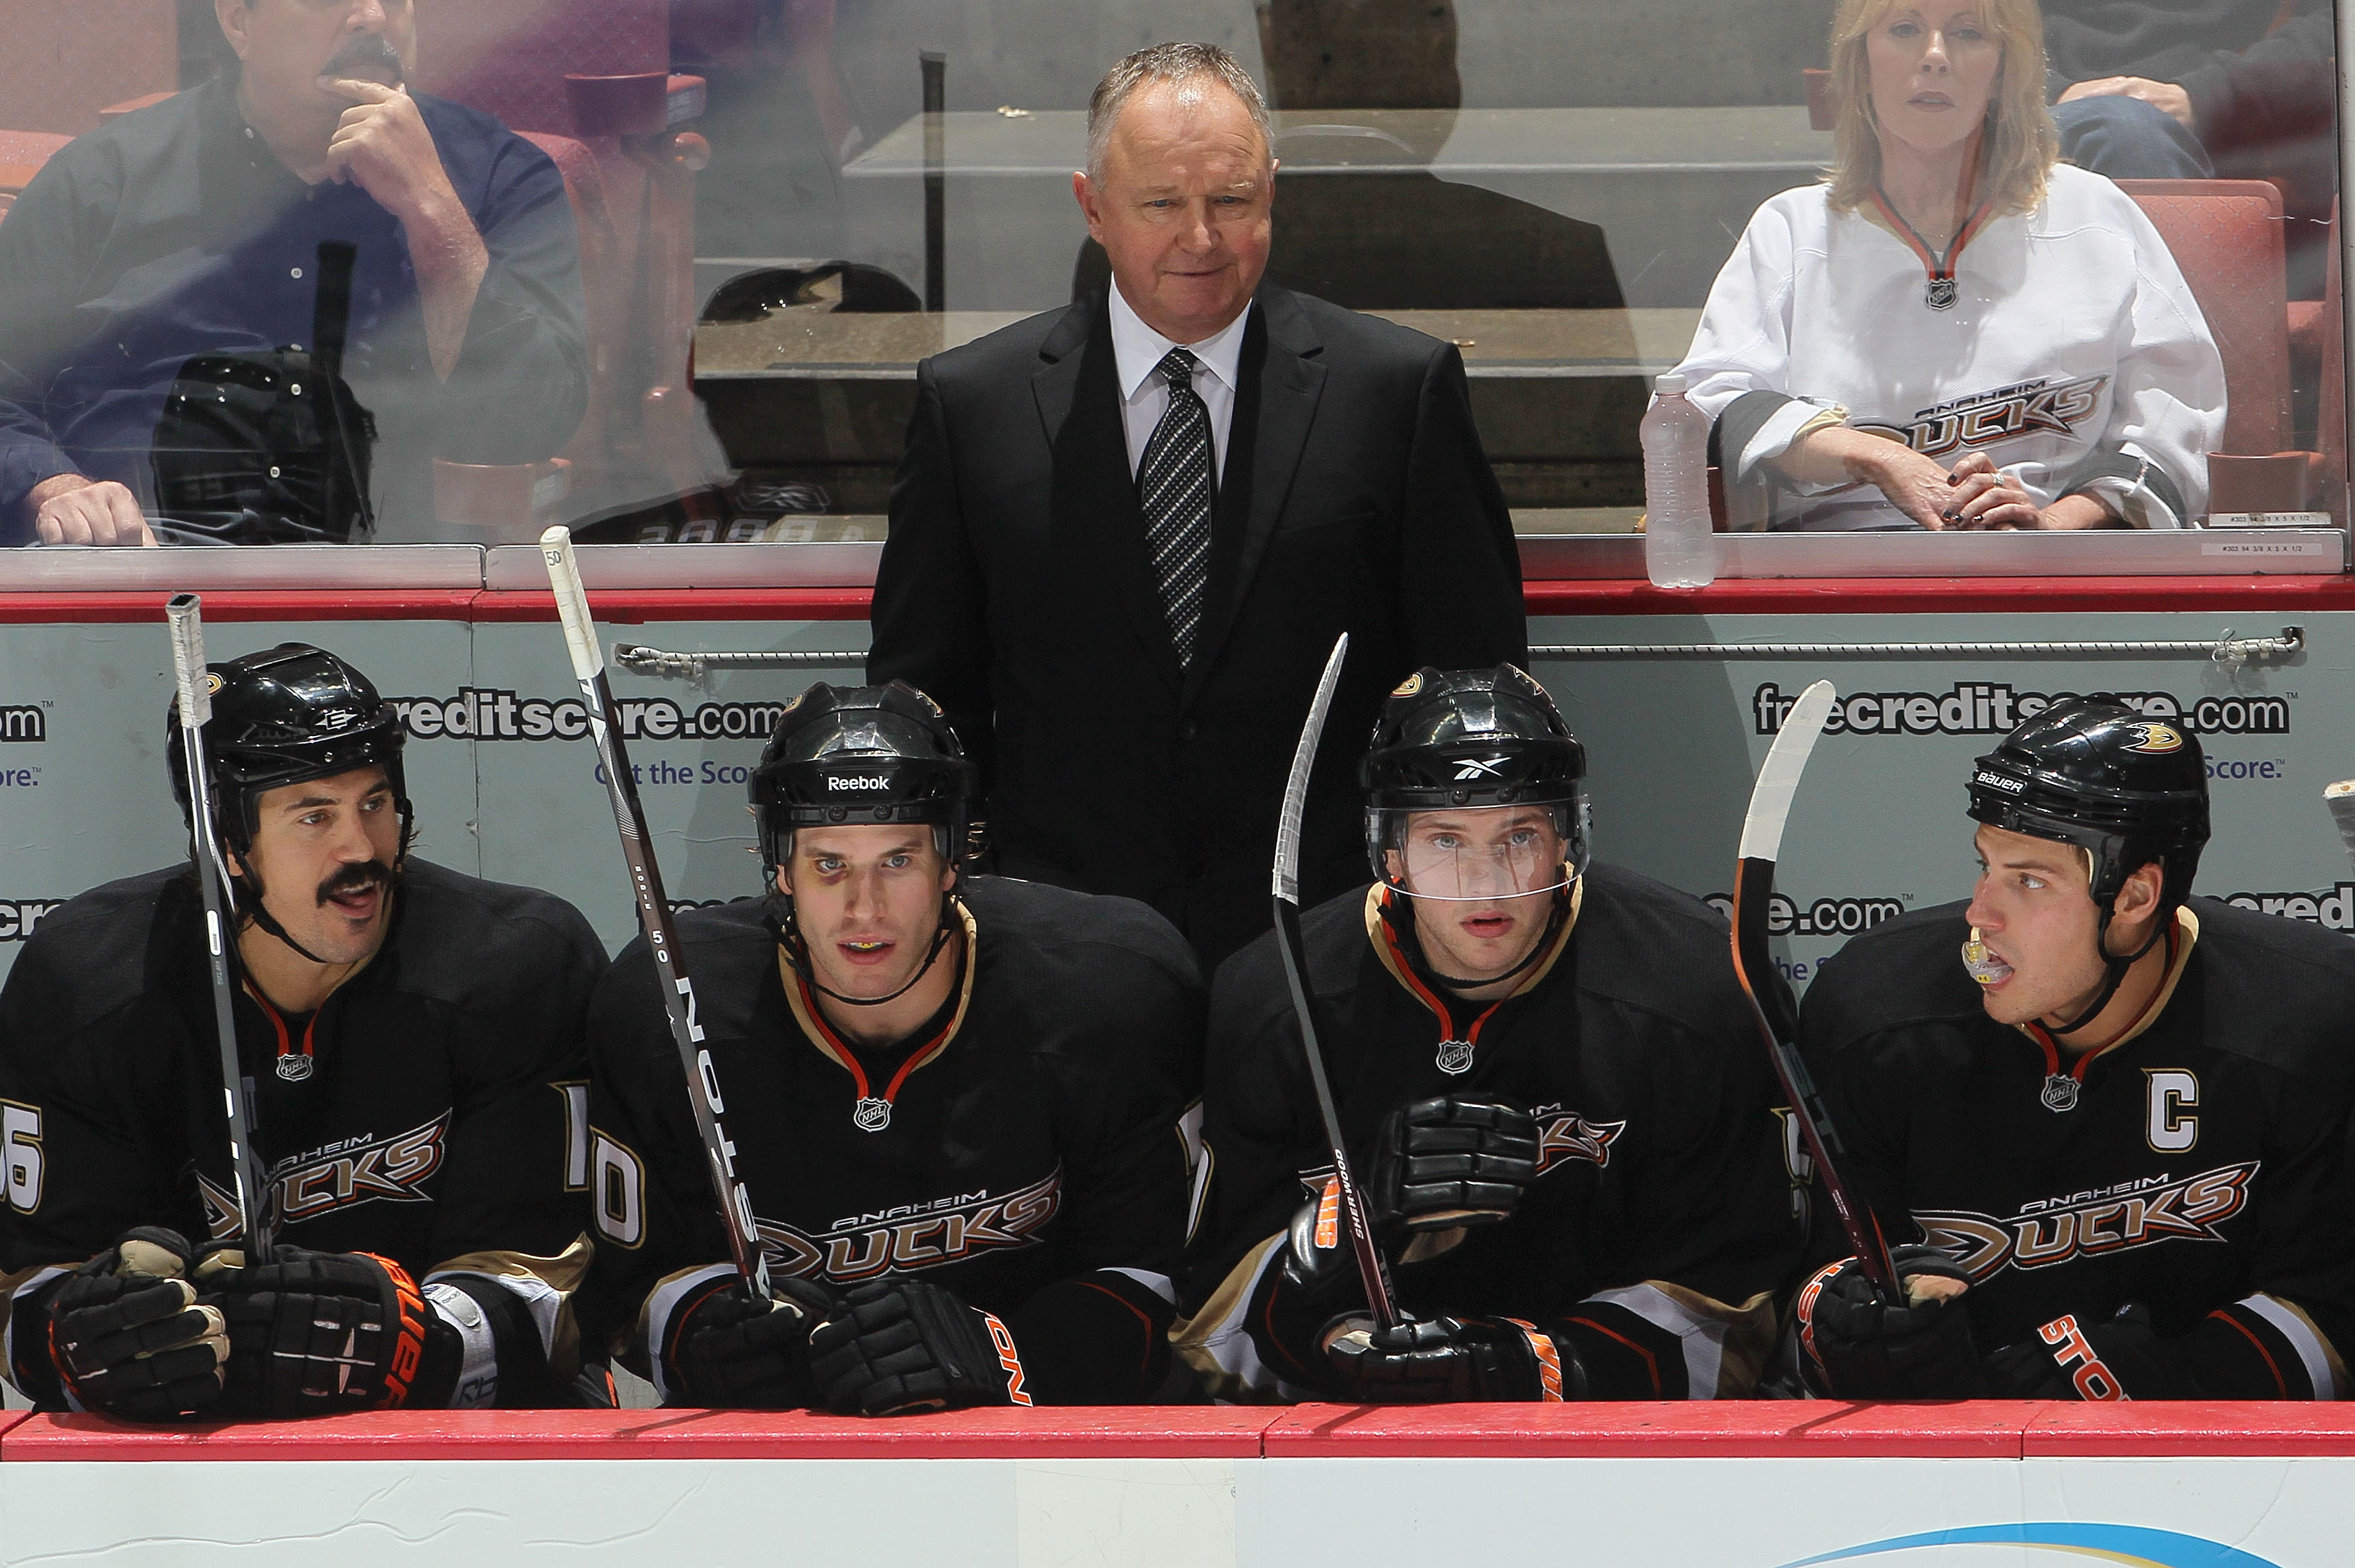 ANAHEIM, CA - OCTOBER 13:  Randy Carlyle, head coach of the Anaheim Ducks looks on from the bench against the Vancouver Canucks during their game at Honda Center on October 13, 2010 in Anaheim, California.  (Photo by Jeff Gross/Getty Images)